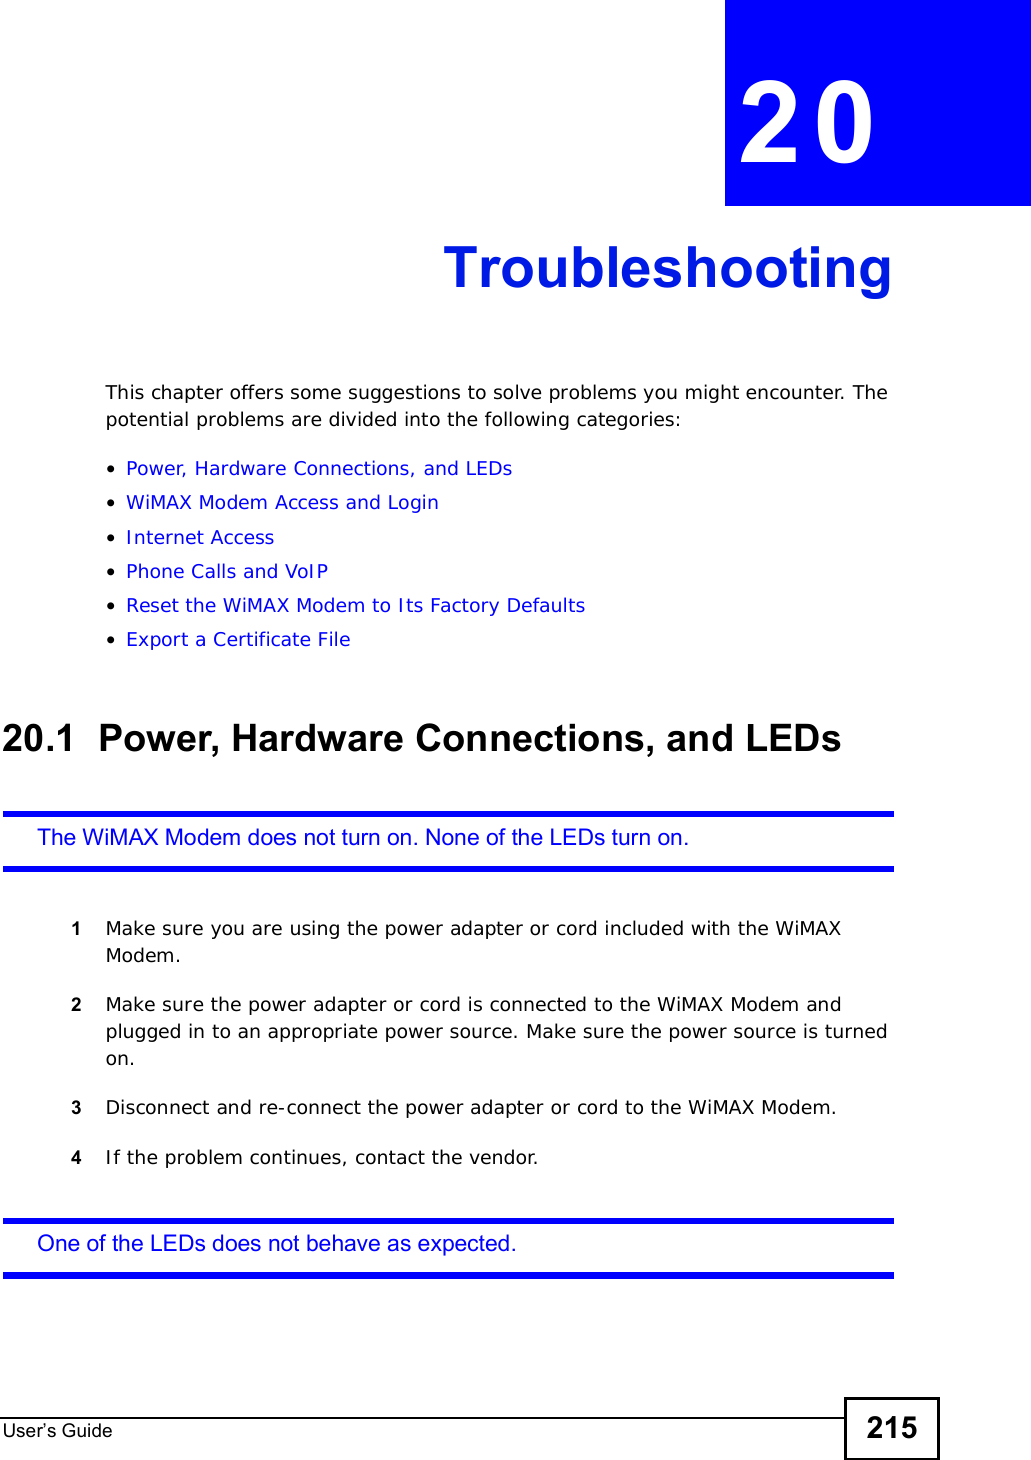 User s Guide 215CHAPTER 20TroubleshootingThis chapter offers some suggestions to solve problems you might encounter. The potential problems are divided into the following categories:•Power, Hardware Connections, and LEDs•WiMAX Modem Access and Login•Internet Access•Phone Calls and VoIP•Reset the WiMAX Modem to Its Factory Defaults•Export a Certificate File20.1  Power, Hardware Connections, and LEDsThe WiMAX Modem does not turn on. None of the LEDs turn on.1Make sure you are using the power adapter or cord included with the WiMAX Modem.2Make sure the power adapter or cord is connected to the WiMAX Modem and plugged in to an appropriate power source. Make sure the power source is turned on.3Disconnect and re-connect the power adapter or cord to the WiMAX Modem.4If the problem continues, contact the vendor.One of the LEDs does not behave as expected.